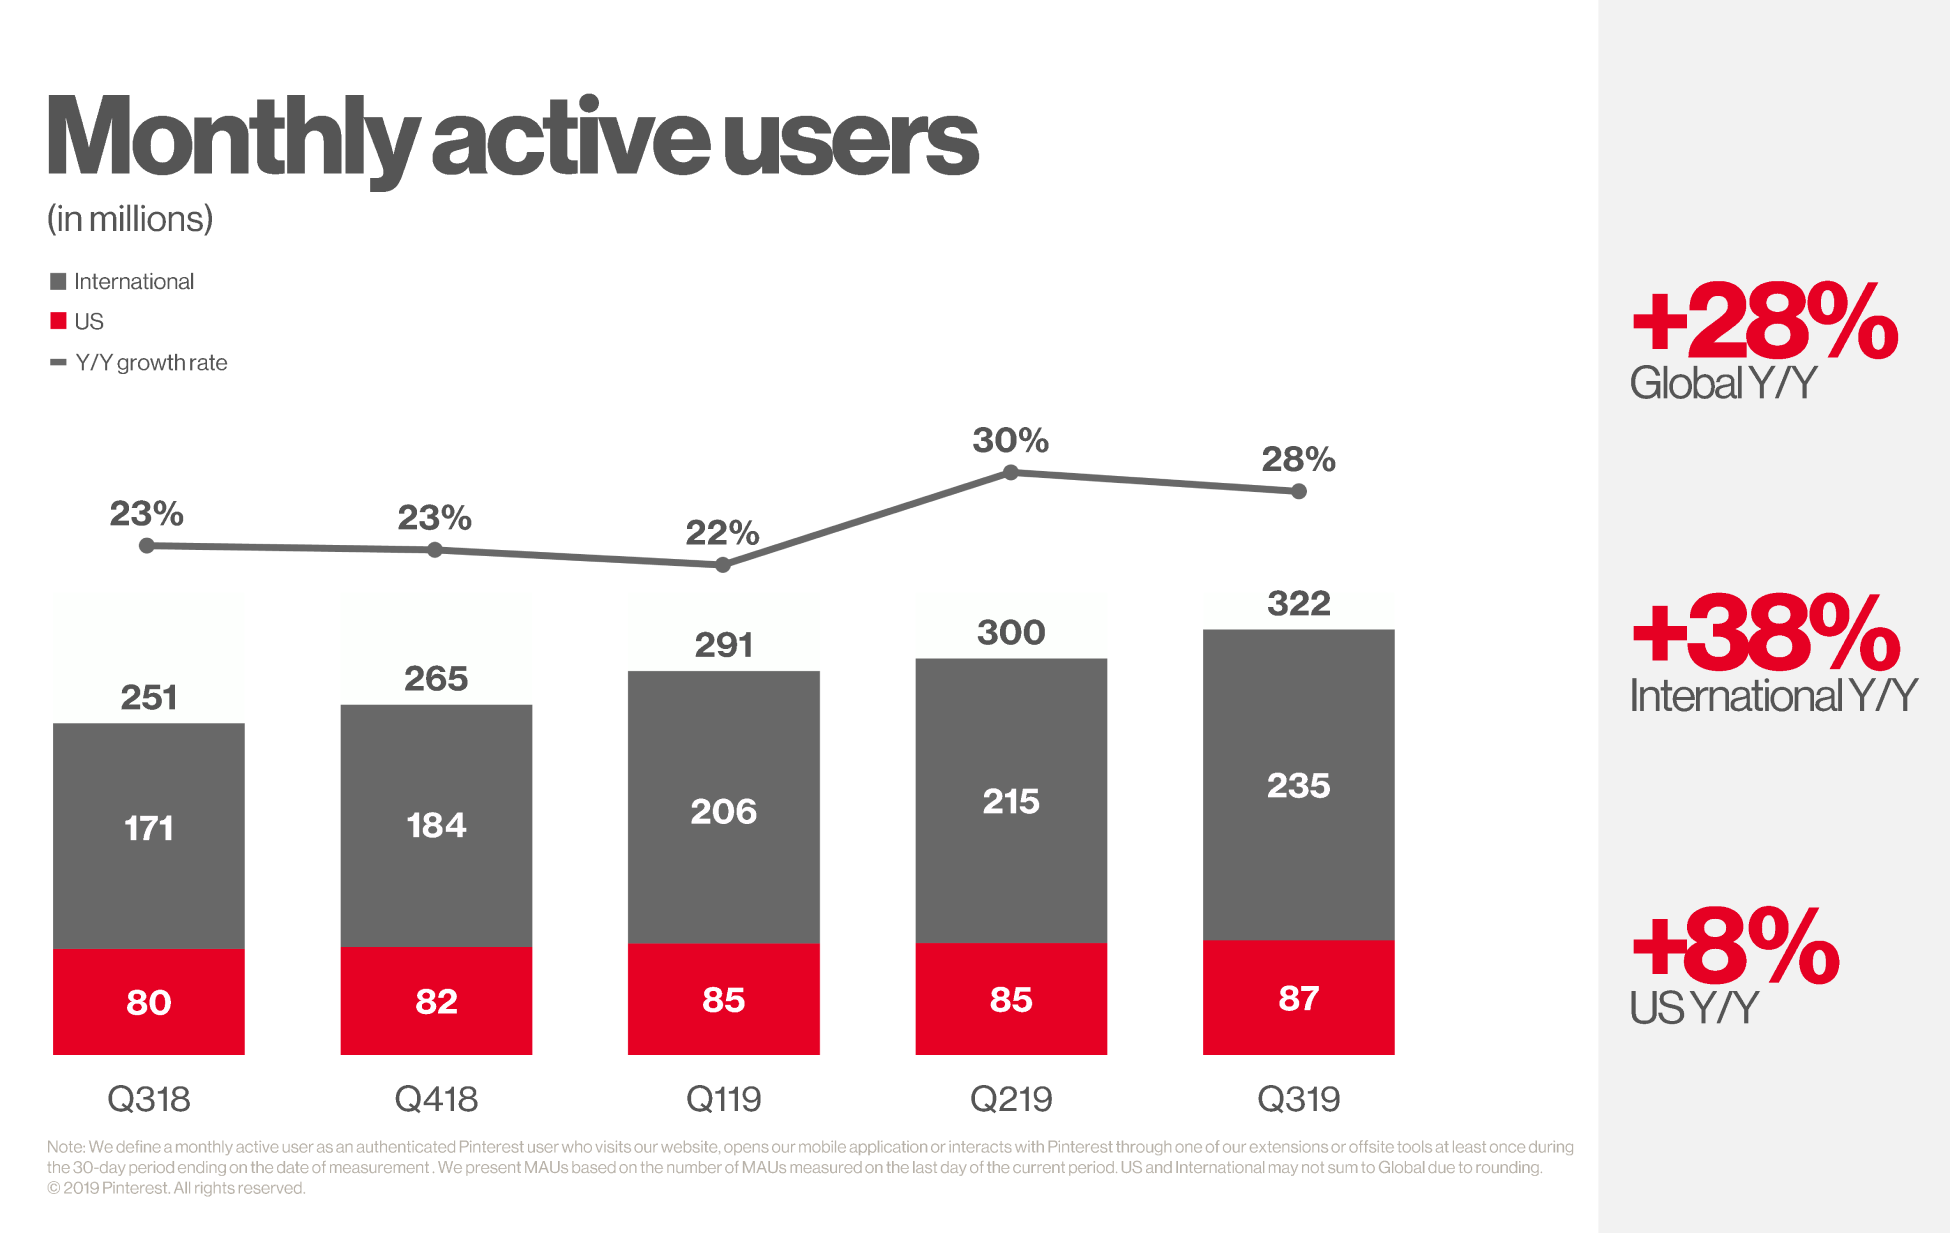 Global Monthly Active Users (MAUs) grew 28% year over year to 322 million